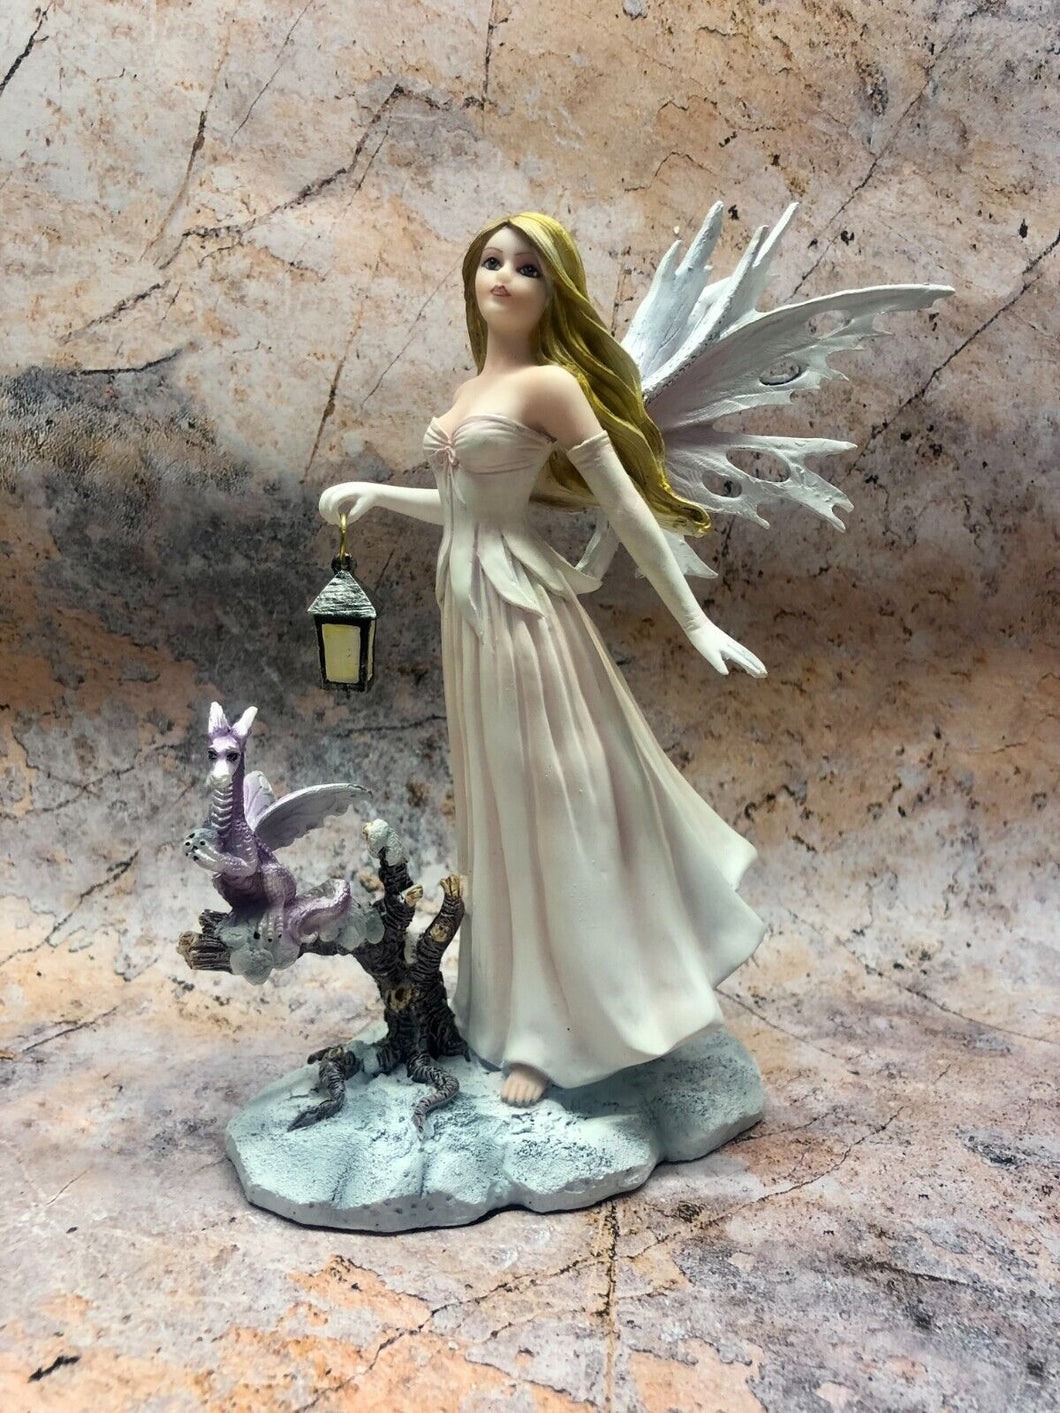 Night Messenger Fairy and Dragon Companion Sculpture Statue Mythical Creatures